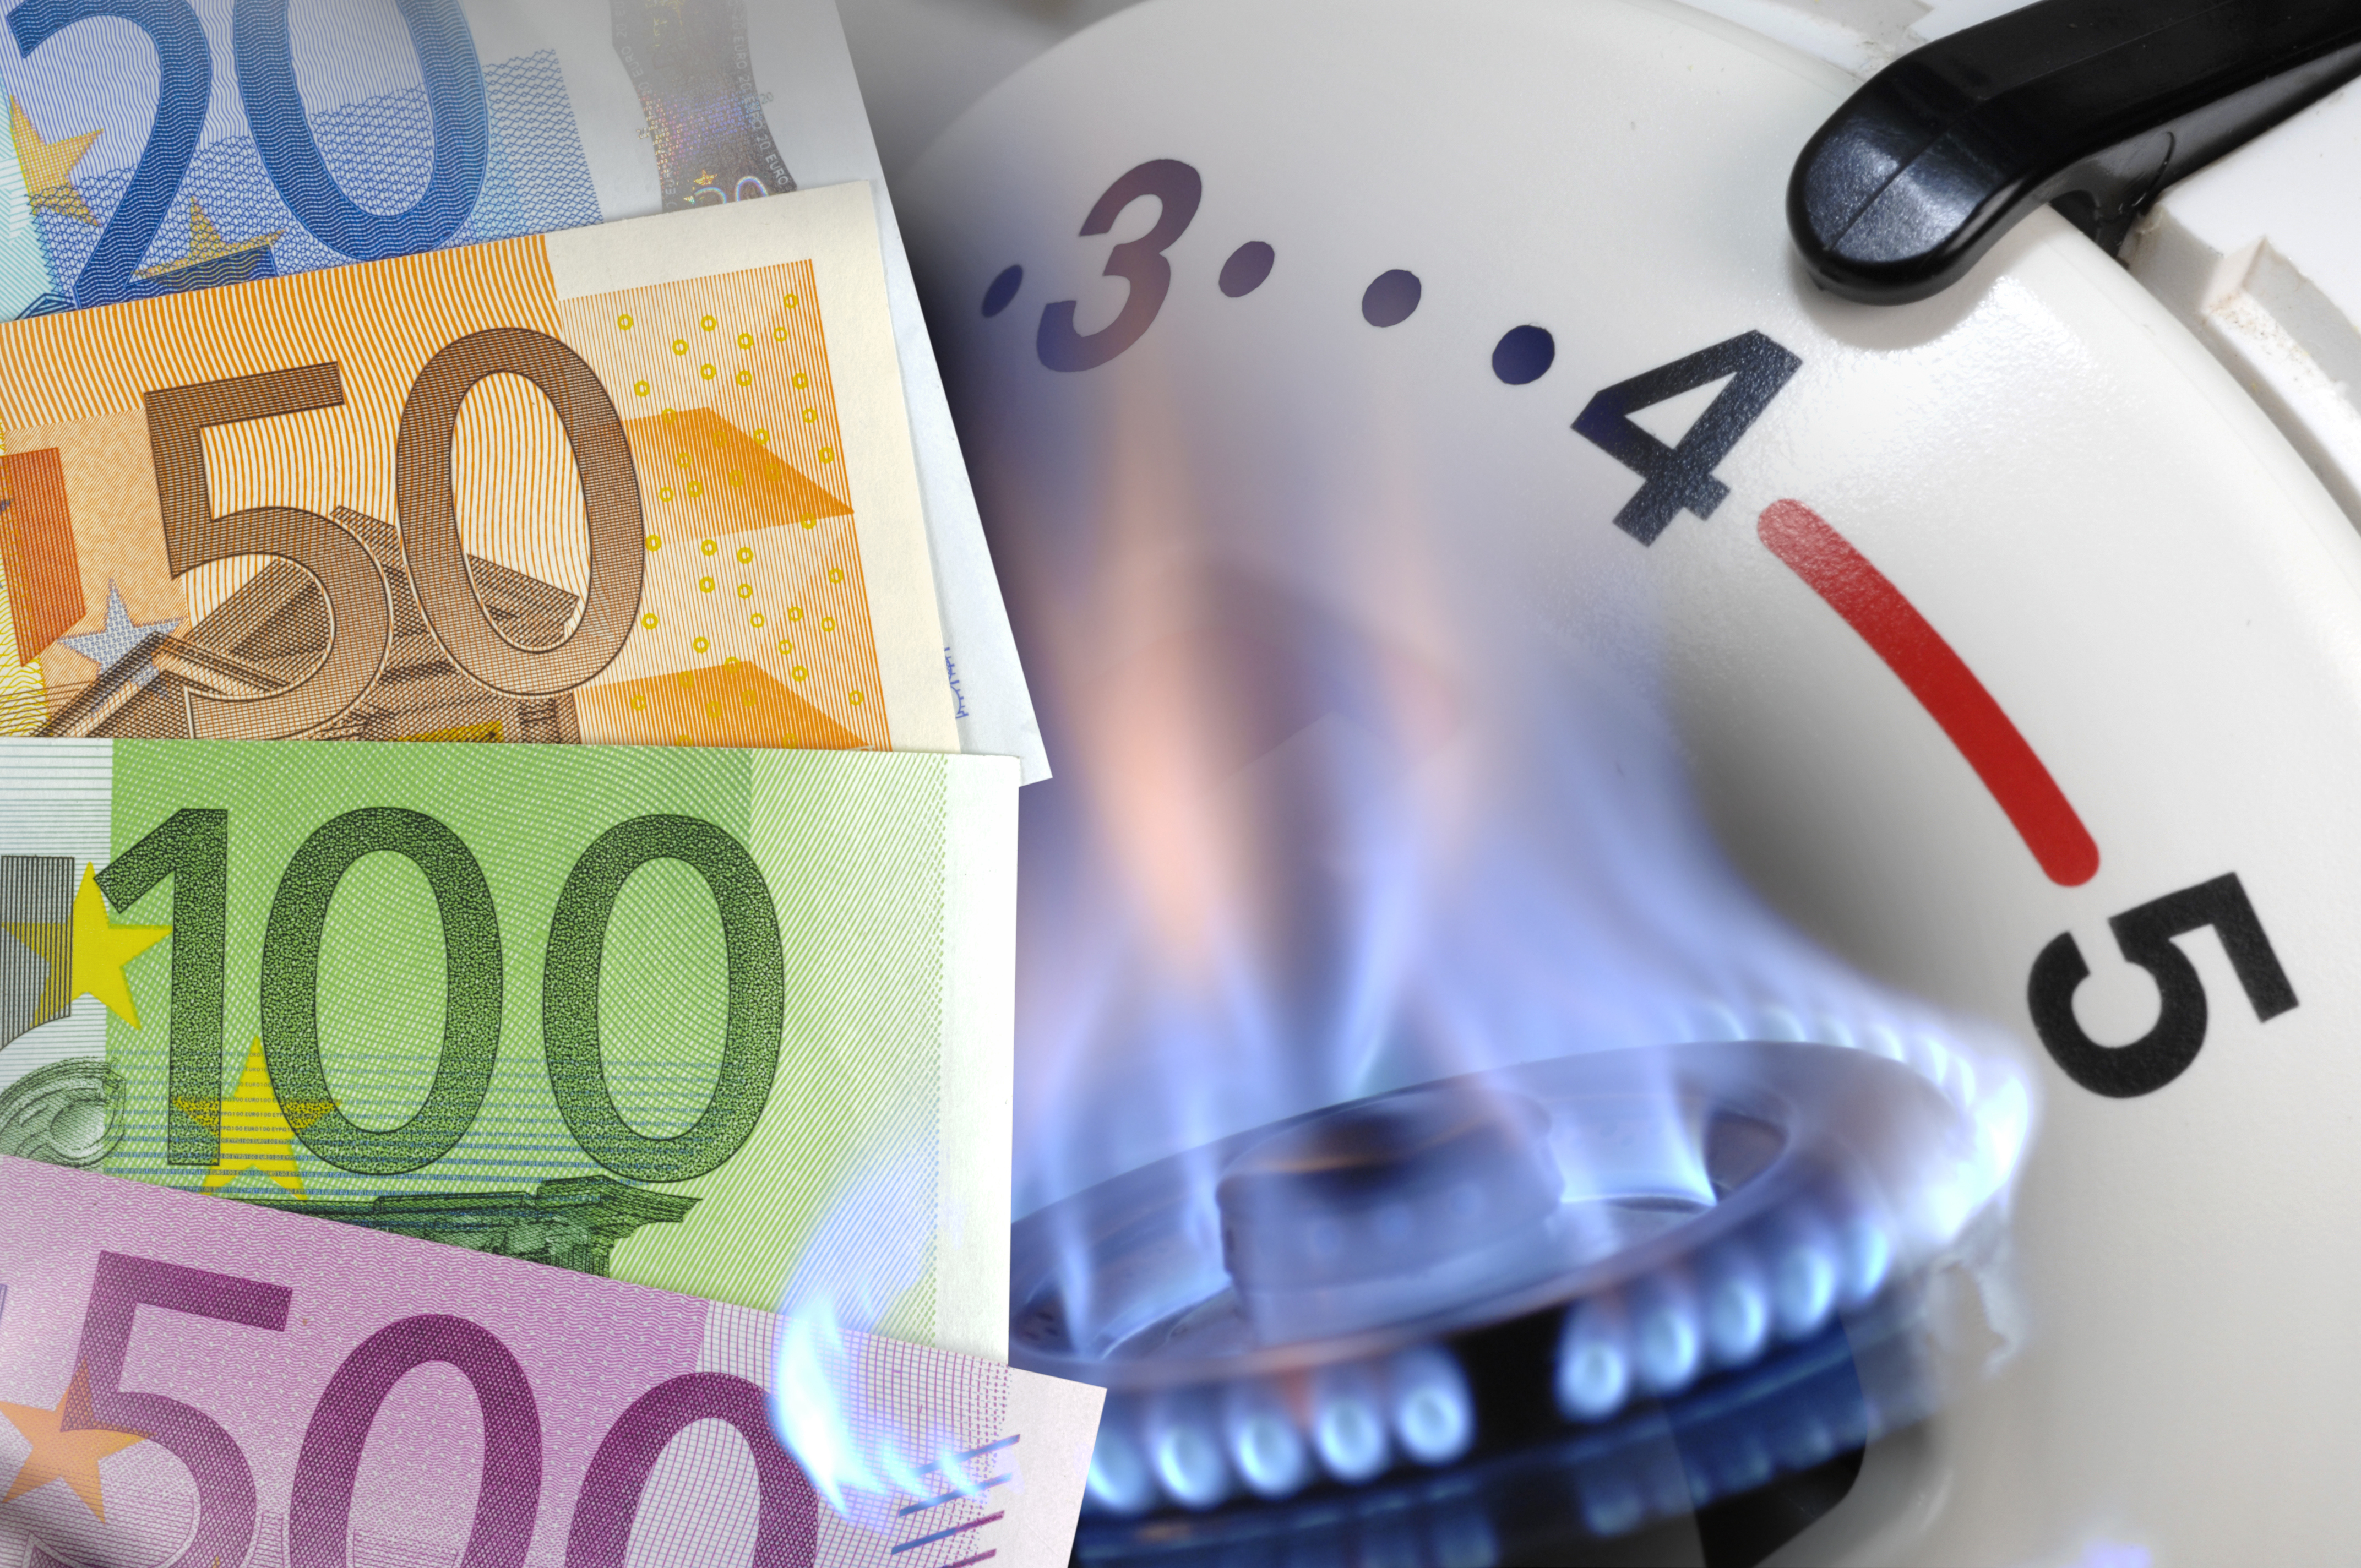 Money next to a gas meter and burner | Source: Getty Images